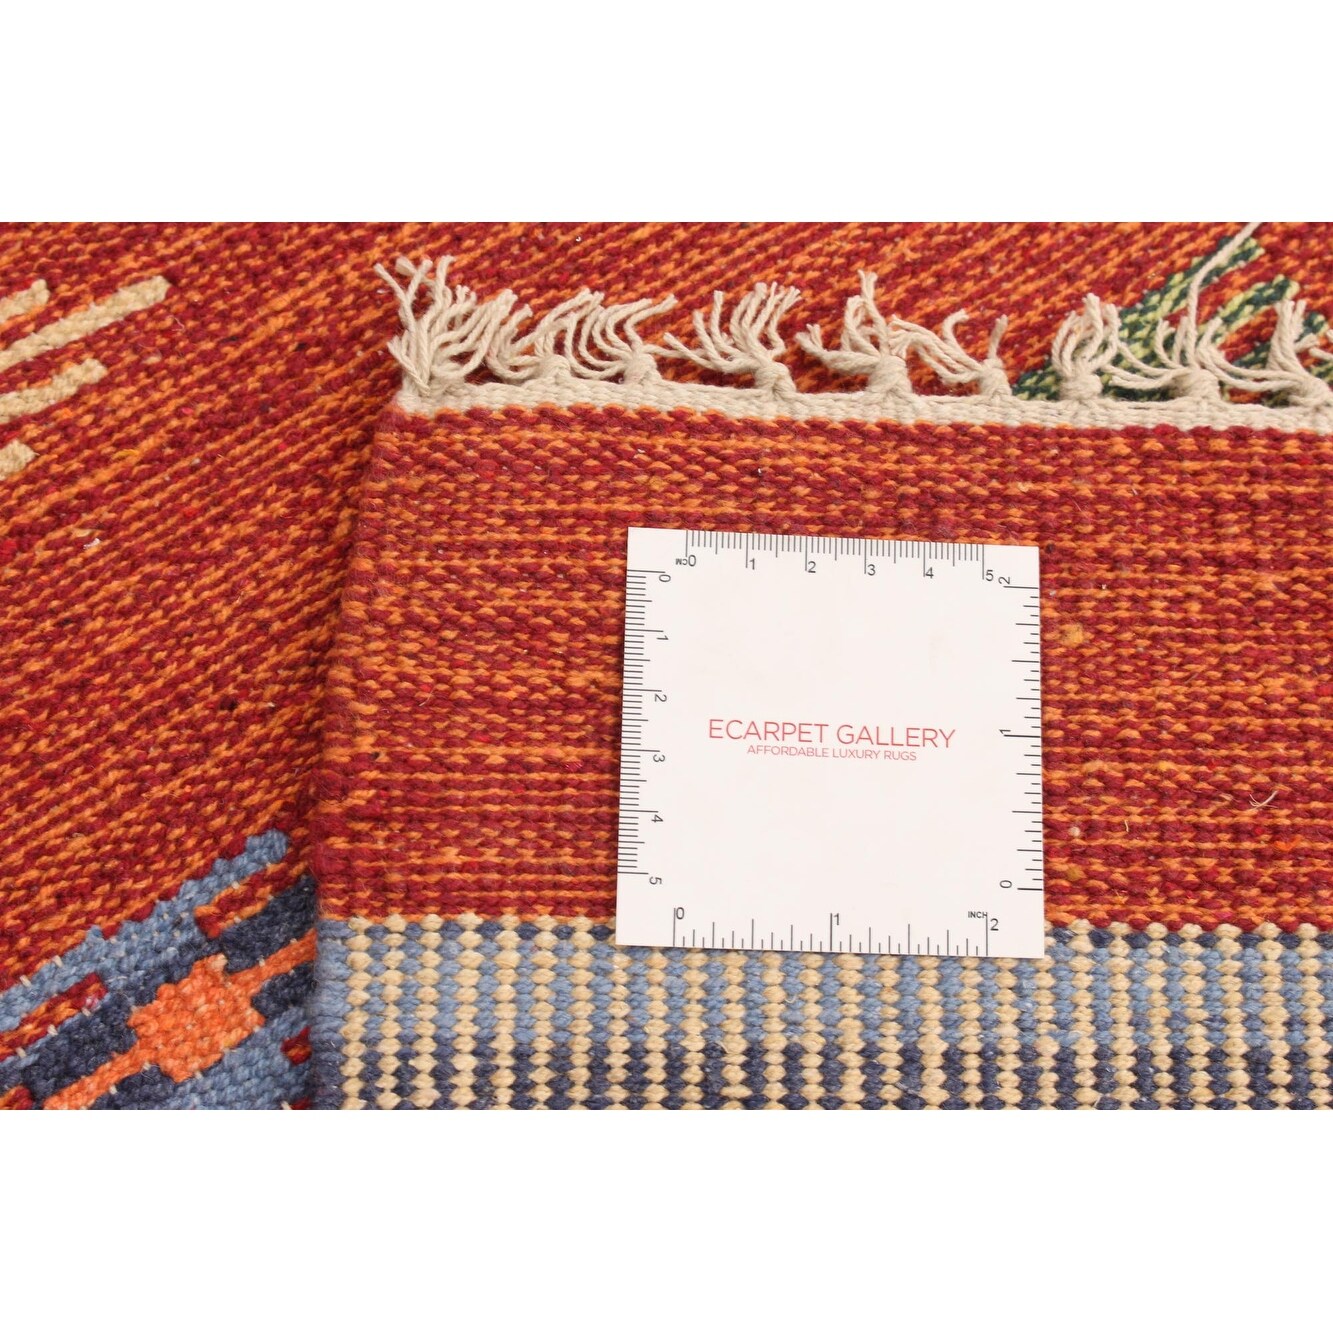 ECARPETGALLERY Flat-weave Bold and Colorful Red Wool Kilim - 2'0 x 3'0